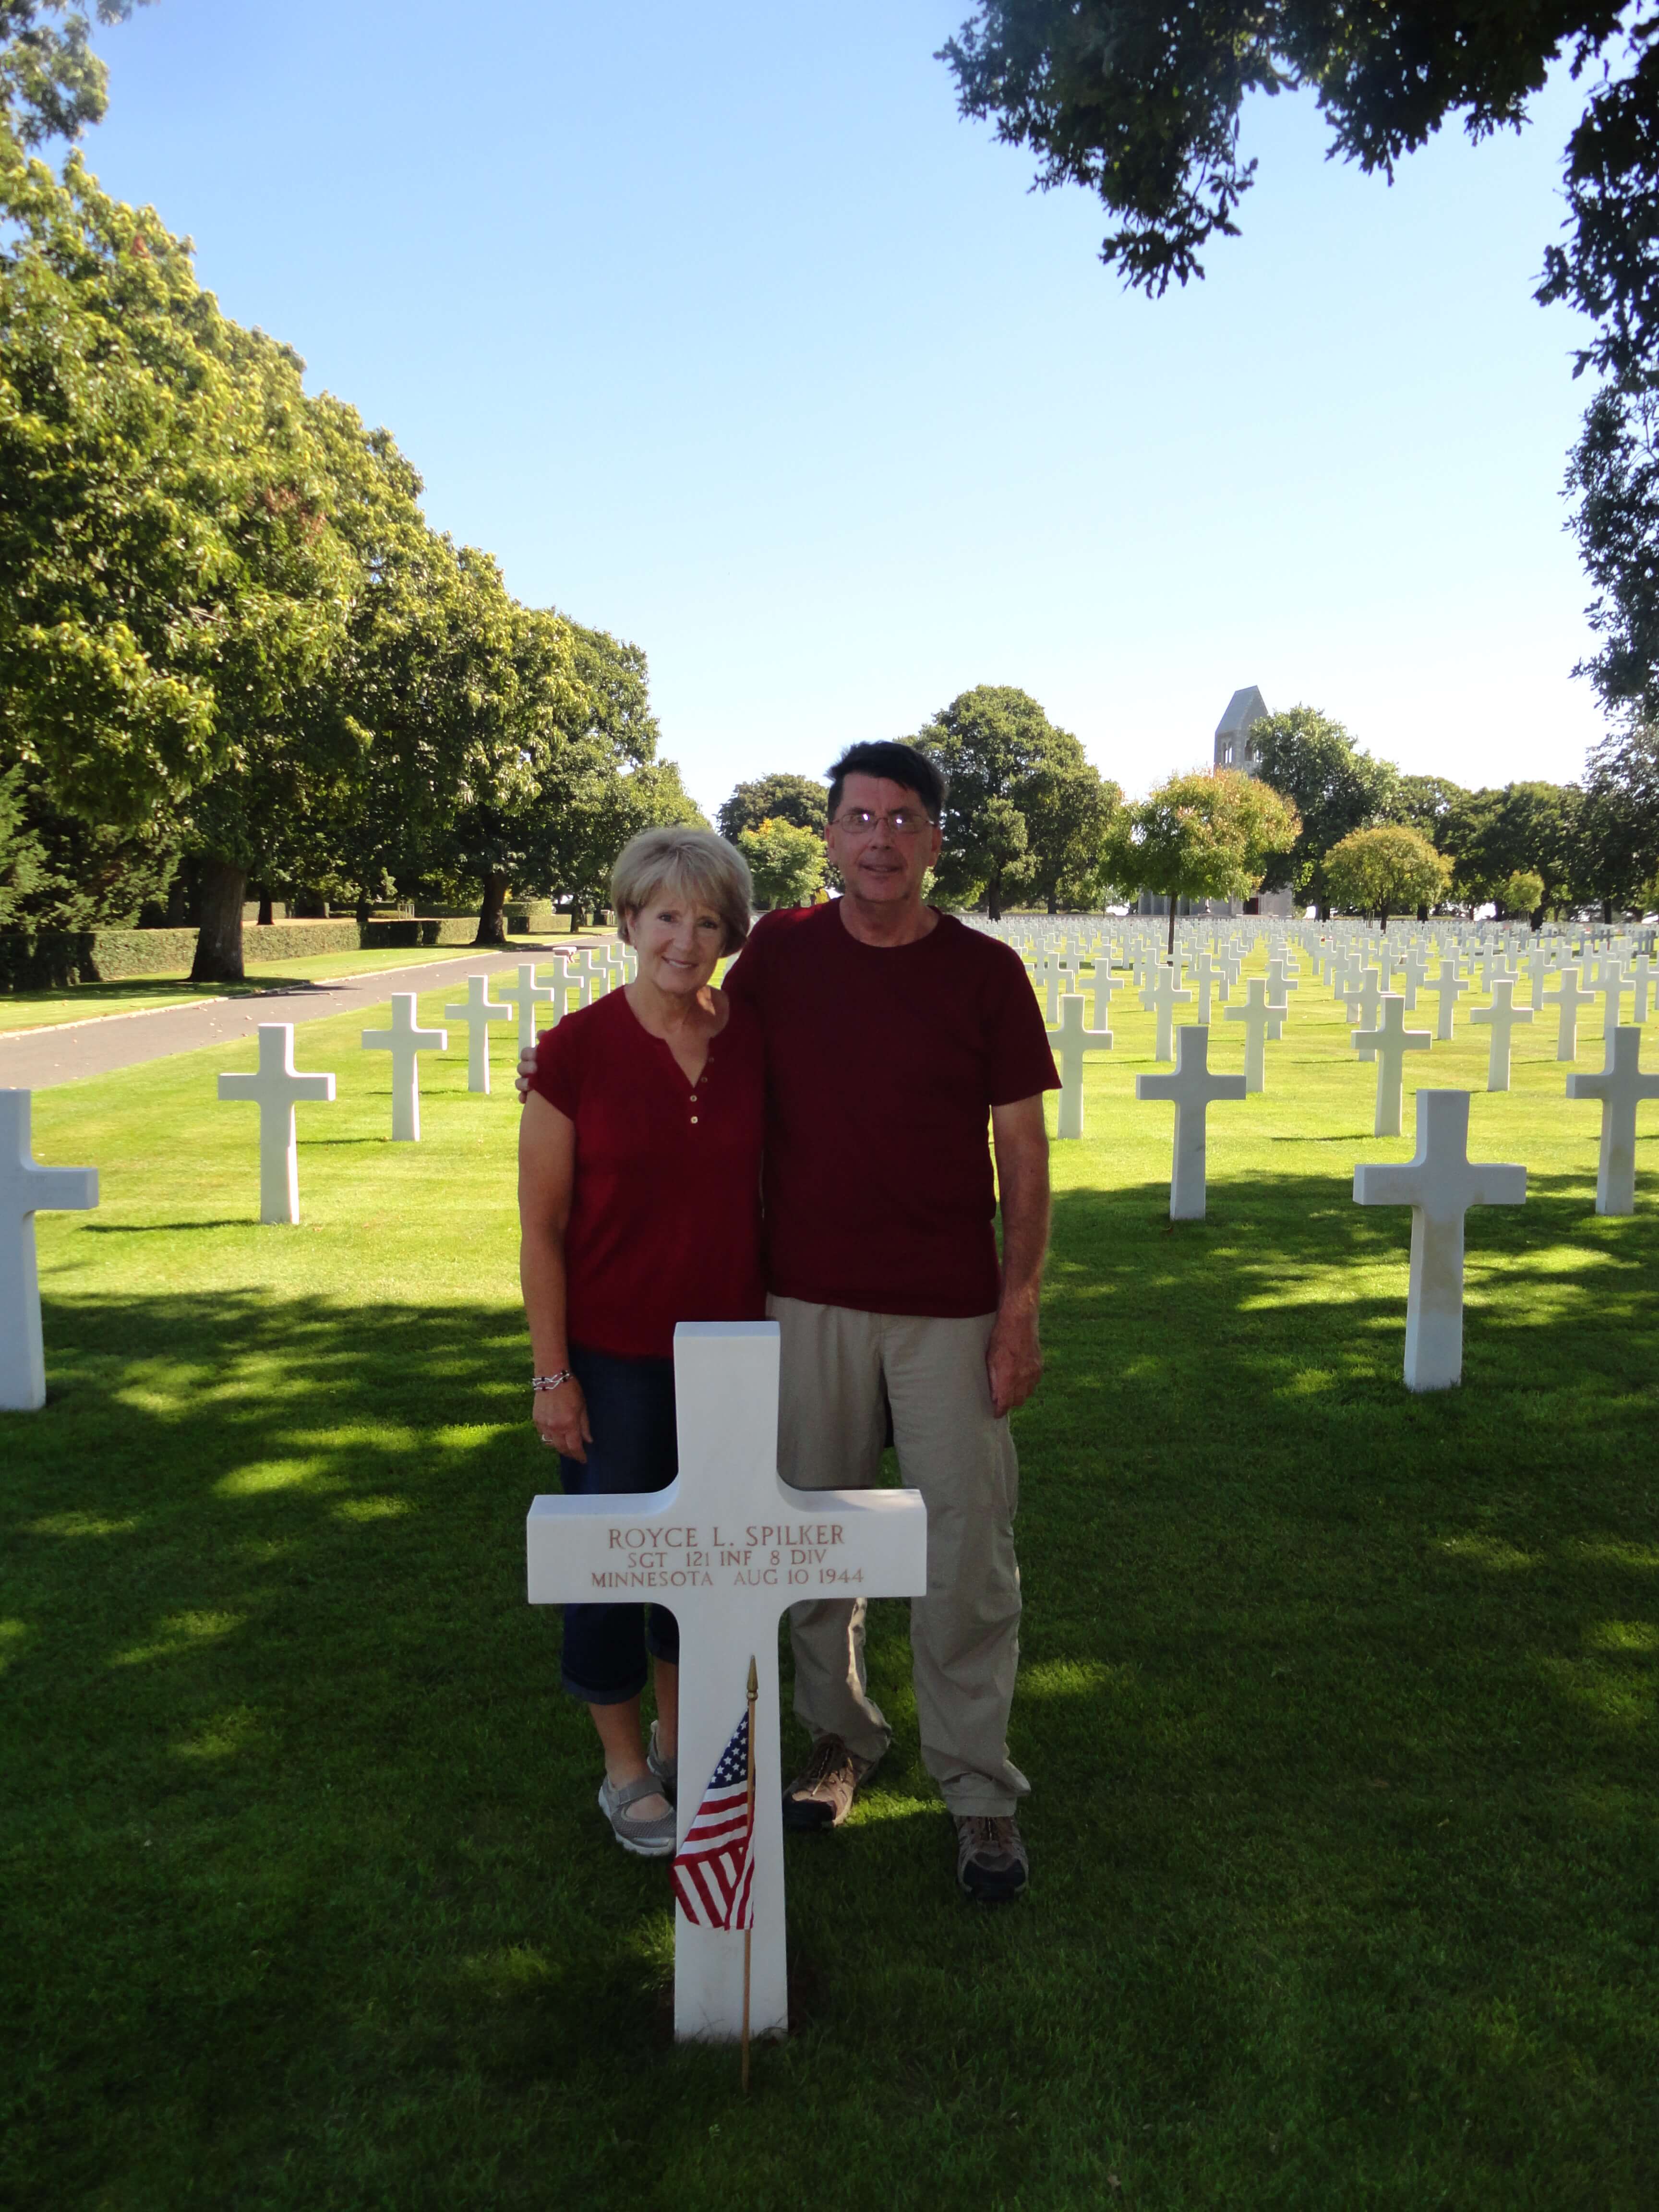 Contemporary photo of an older couple standing in a military cemetery behind a cross grave marker.